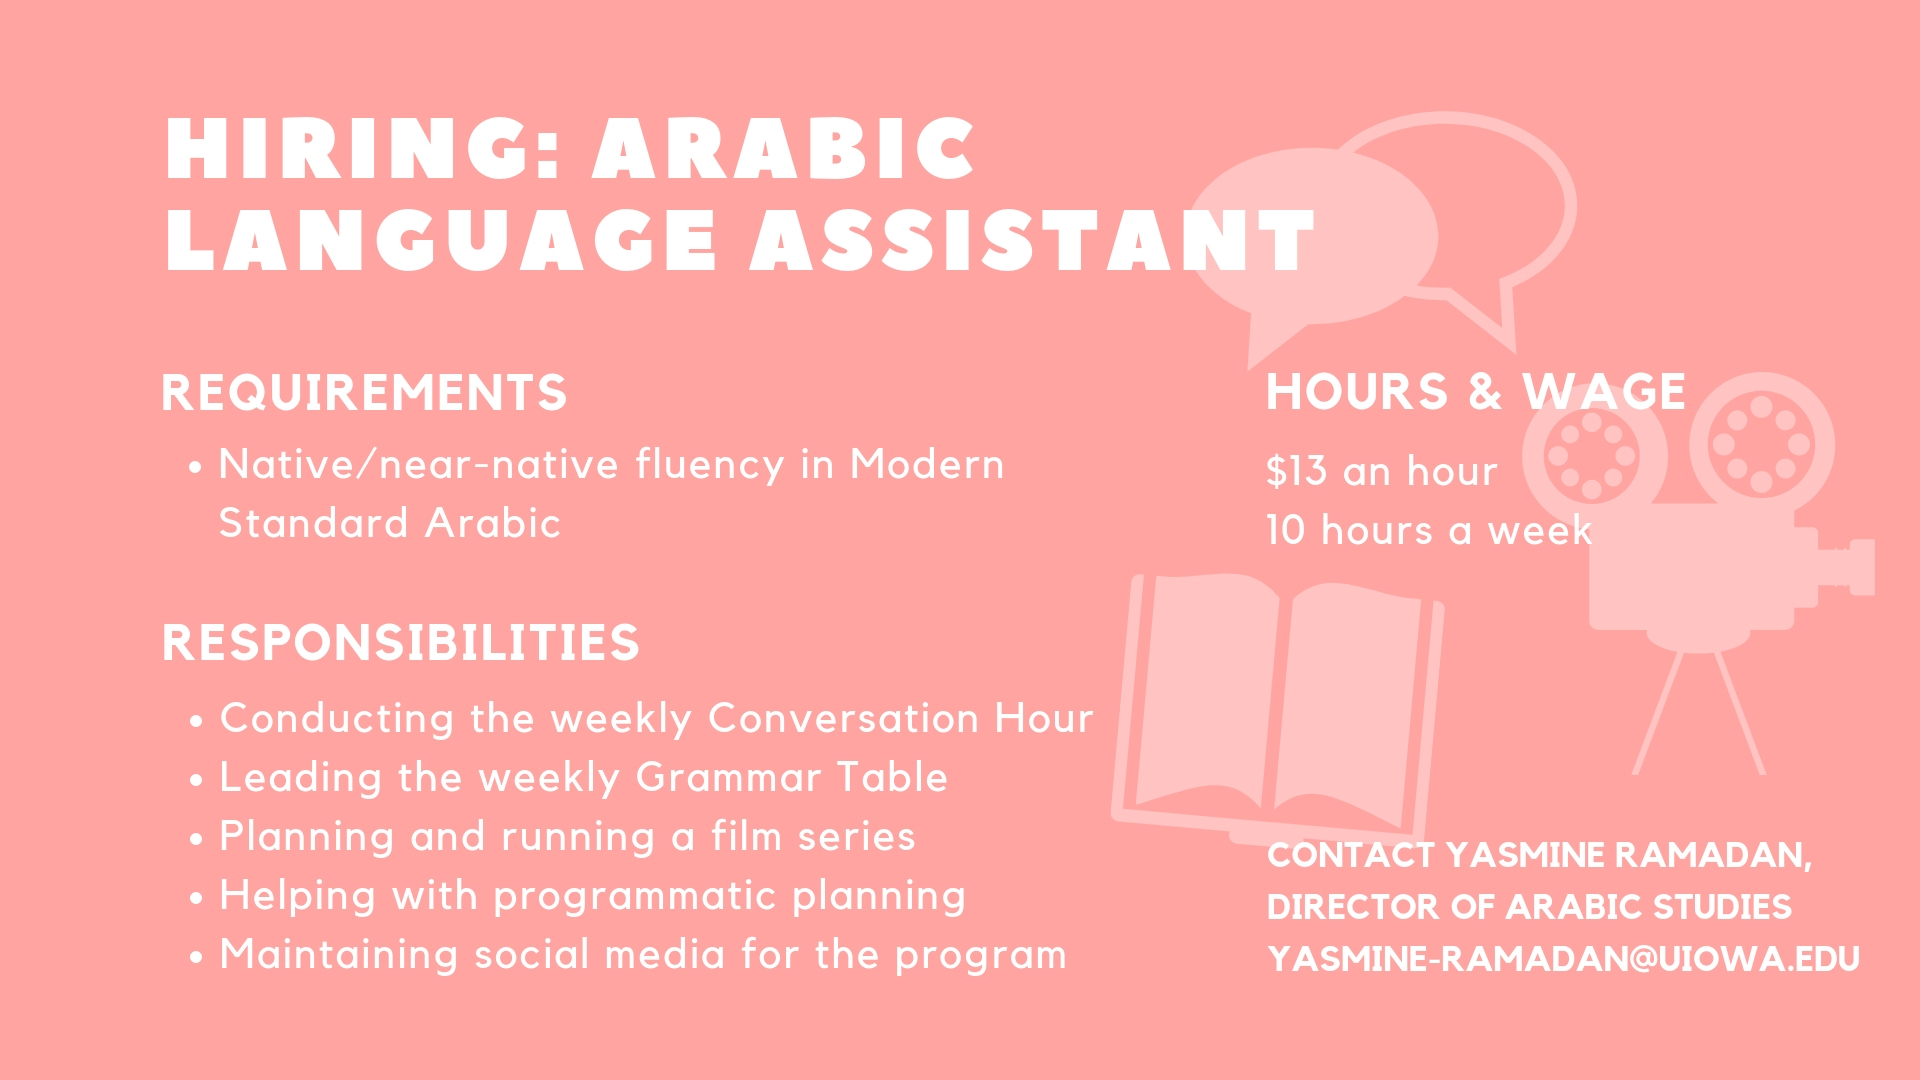 Requirements Native/near-native fluency in Modern Standard Arabic   Responsibilities * Conducting the weekly Conversation Hour * Leading the weekly Grammar Table  * Planning and running a film series * Helping with programmatic planning * Maintaining social media for the program   Hours and Wage. $13 an hour  10 hours a week  Contact Yasmine Ramadan, Director of Arabic Studies, yasmine-ramadan@uiowa.edu